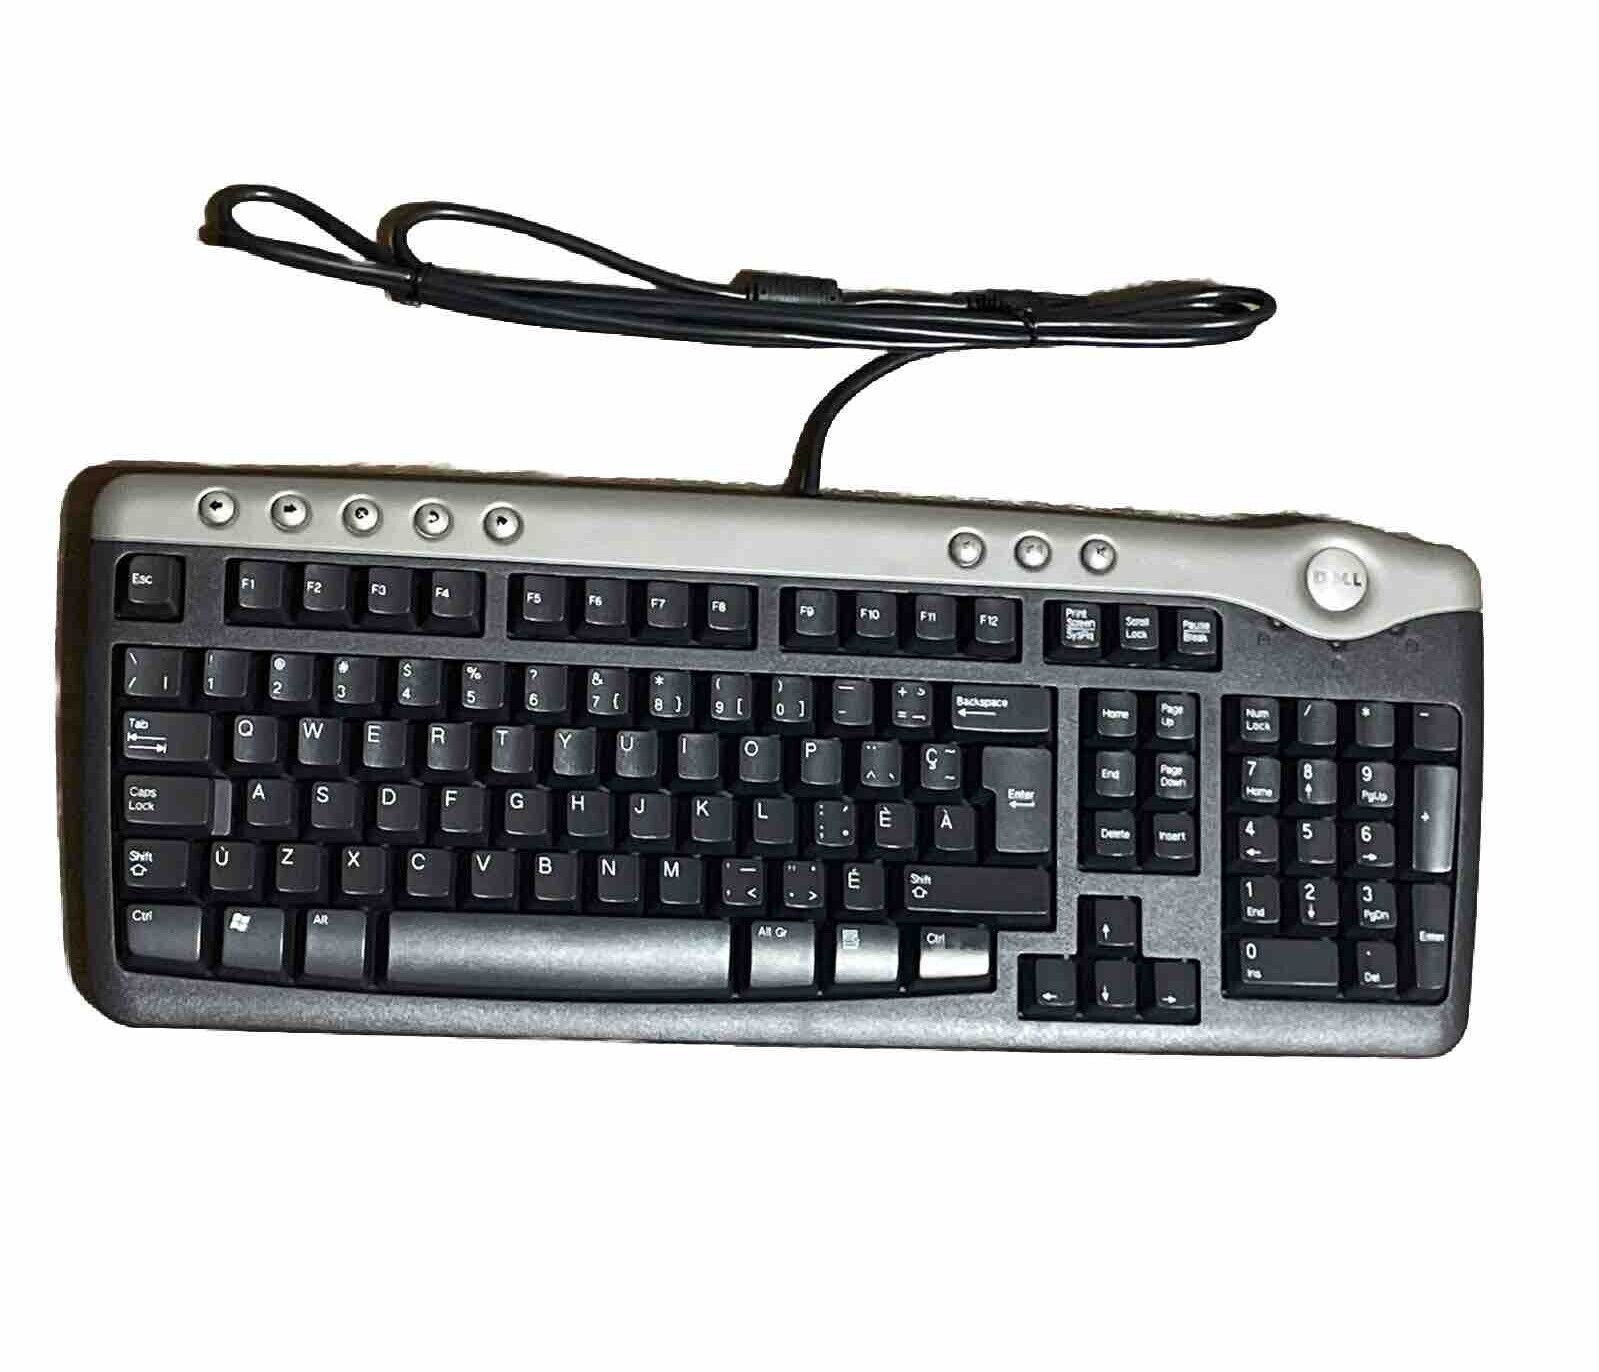 New Dell Keyboard Model SK-8125 Rev A00 Wired USB Portuguese Key D2166 0D2166